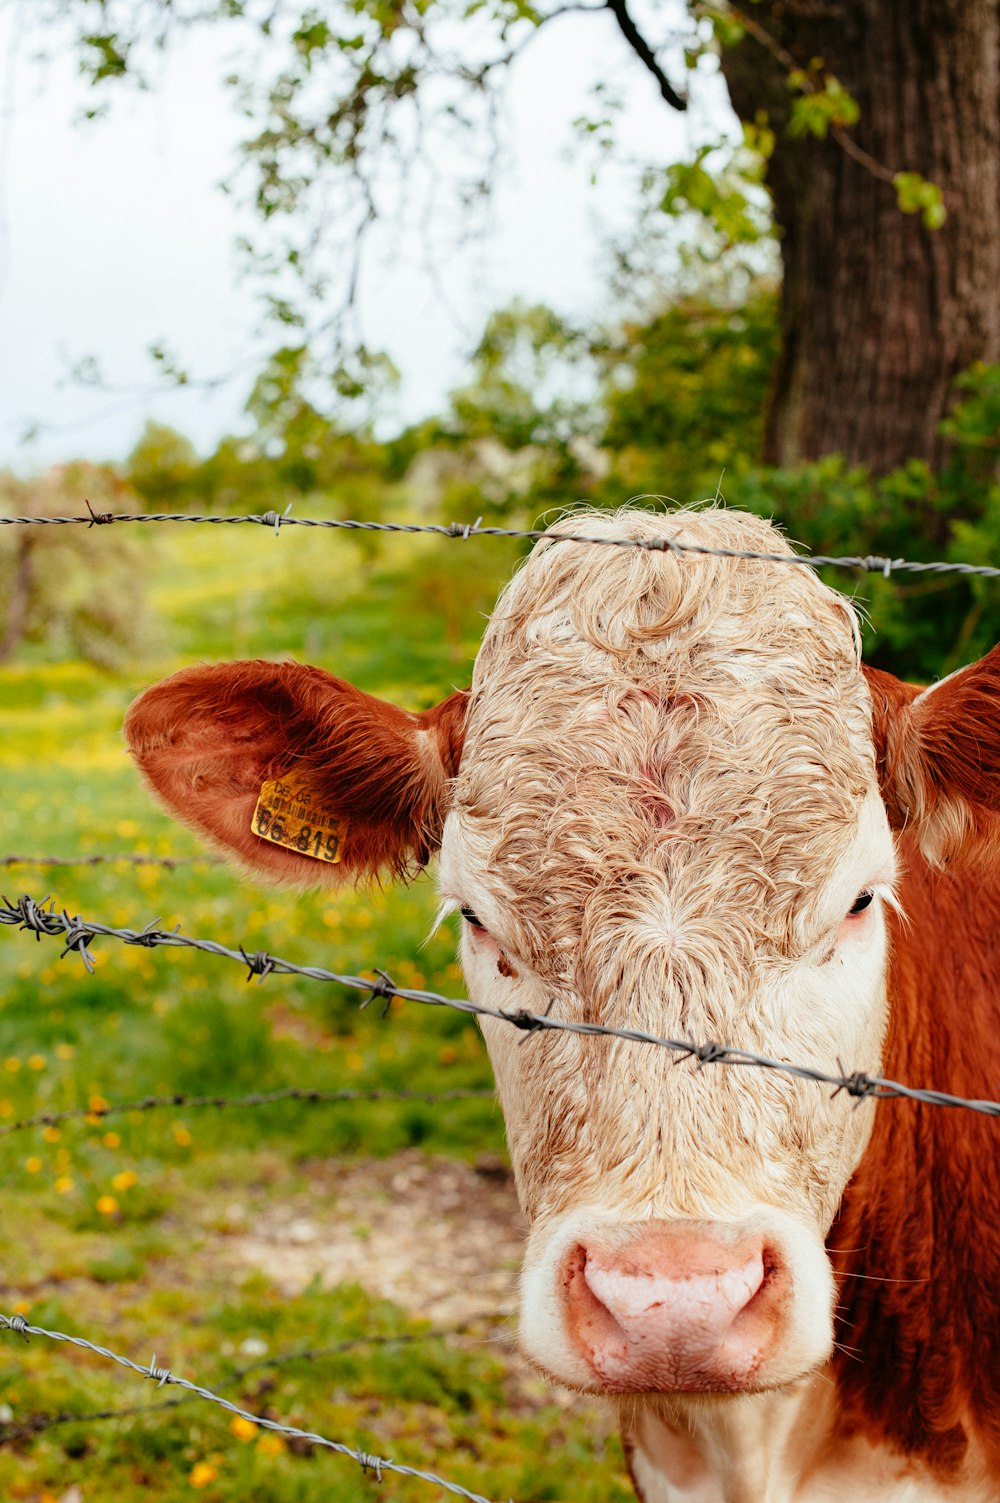 a close up of a cow behind a barbed wire fence